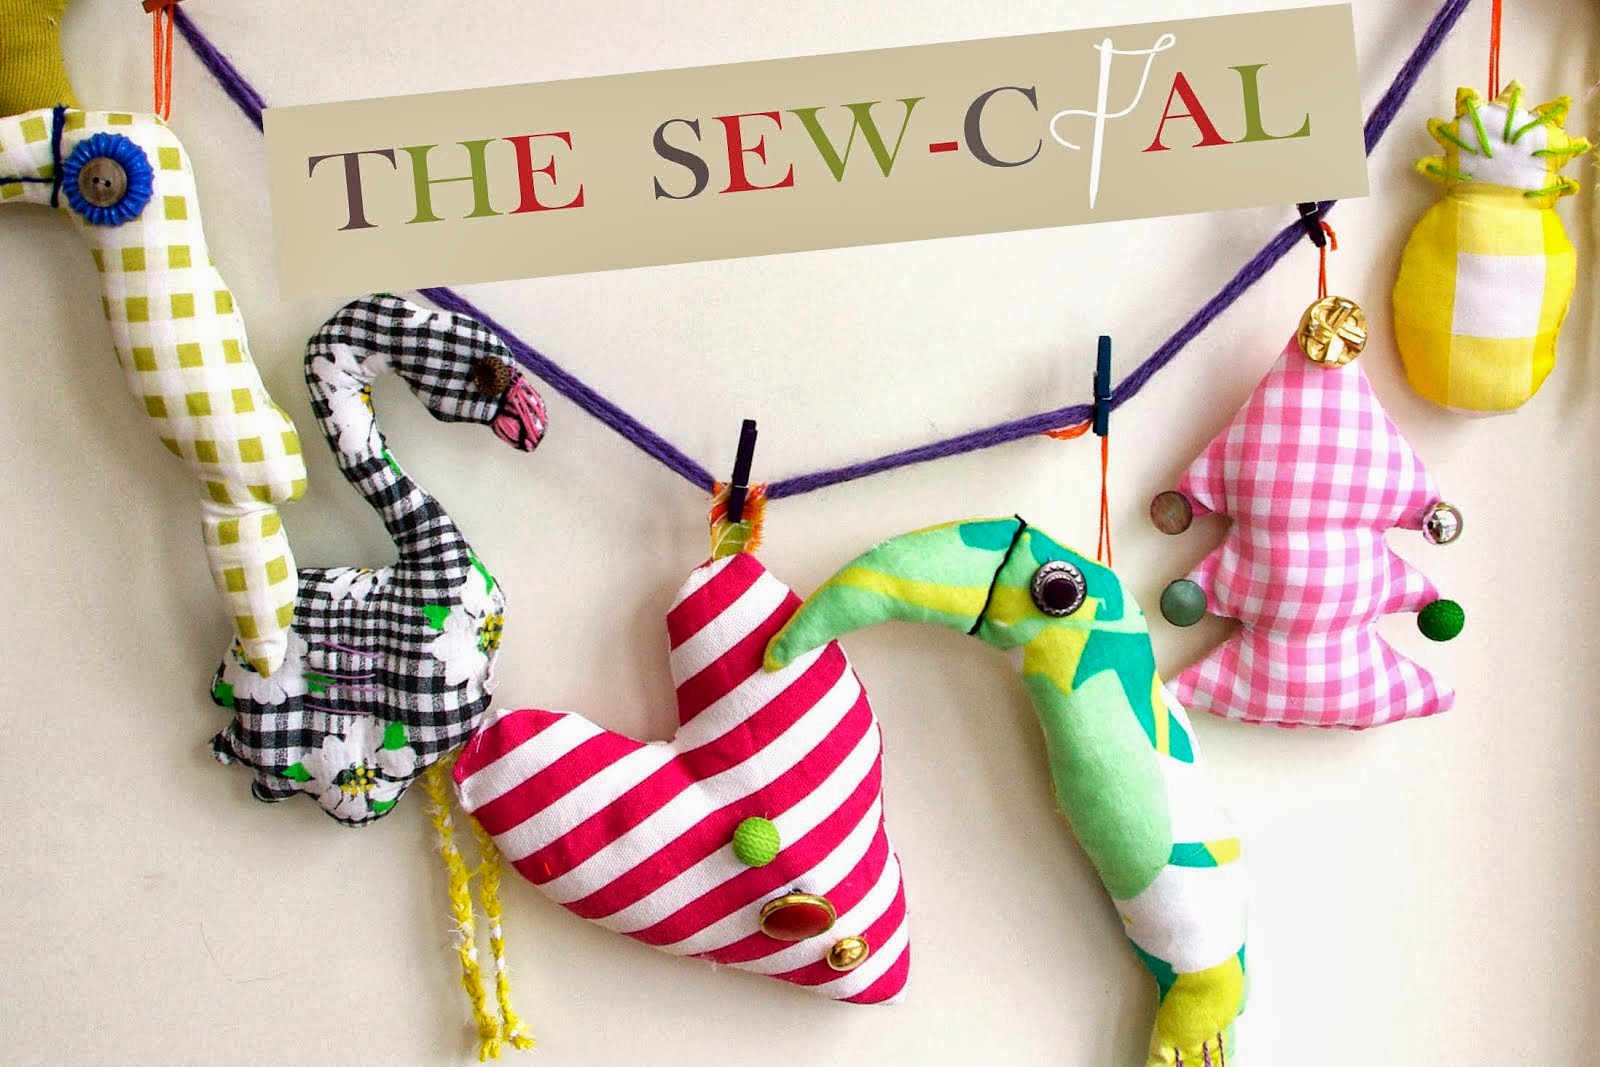 The SEW-cial